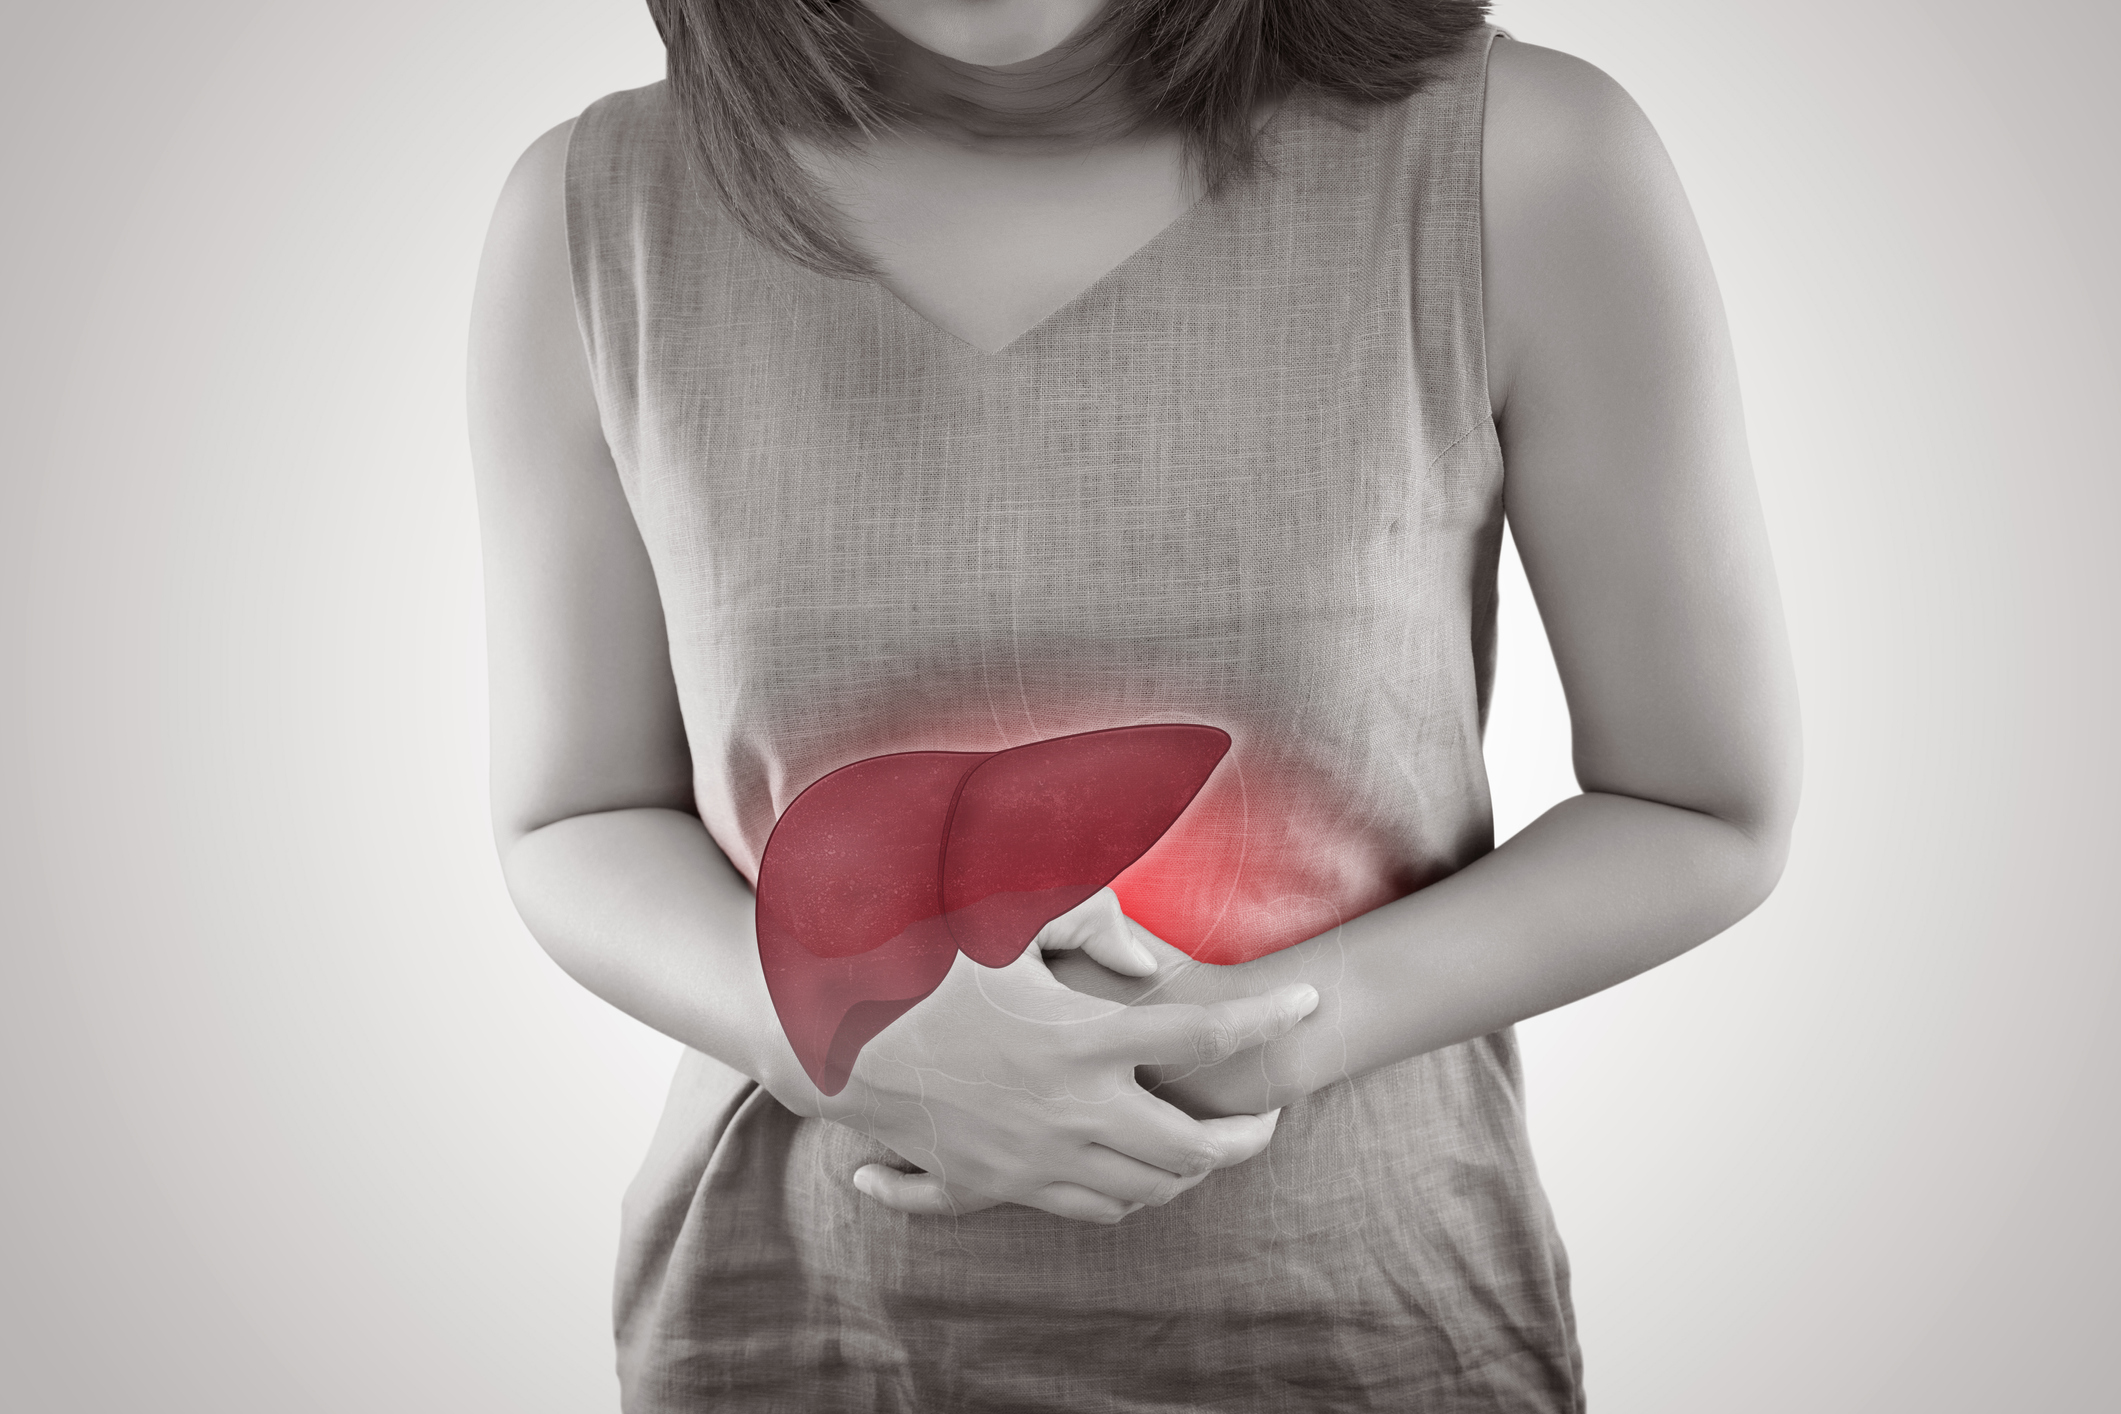 One In Four Adults Has A Liver C...